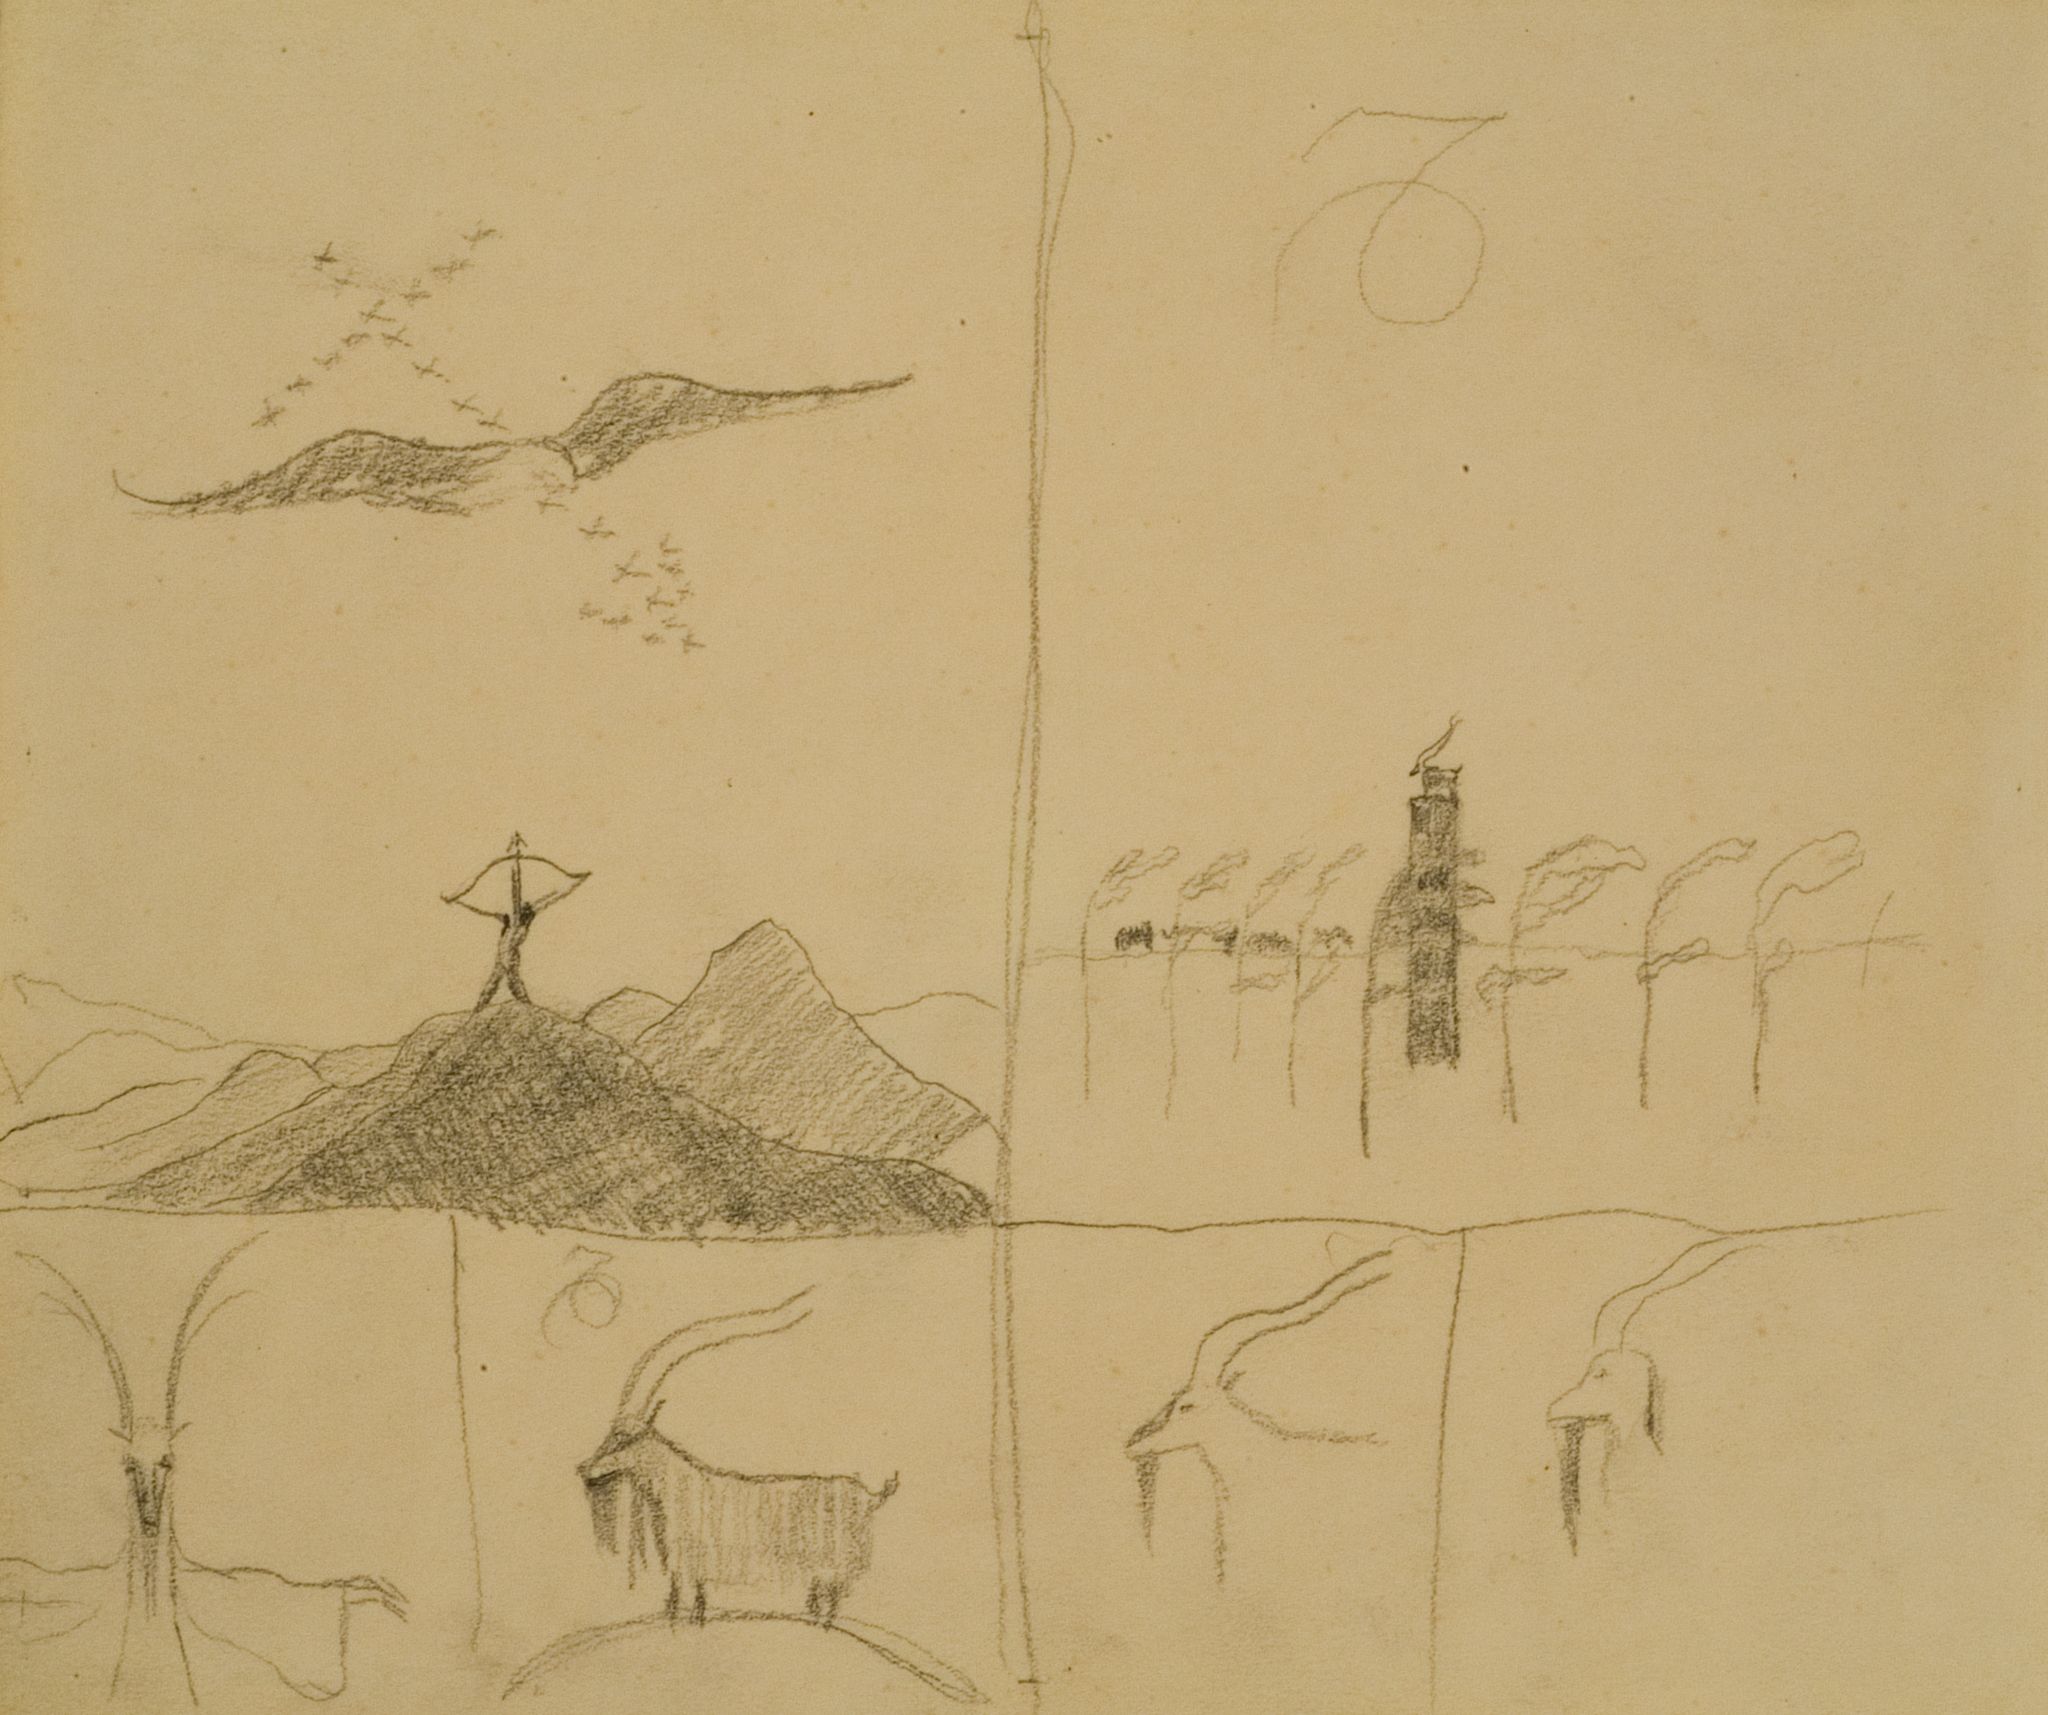 Image for: Sketches for the compositions Sagittarius and Capricorn from "The Zodiac" cycle consisting of 12 paintings